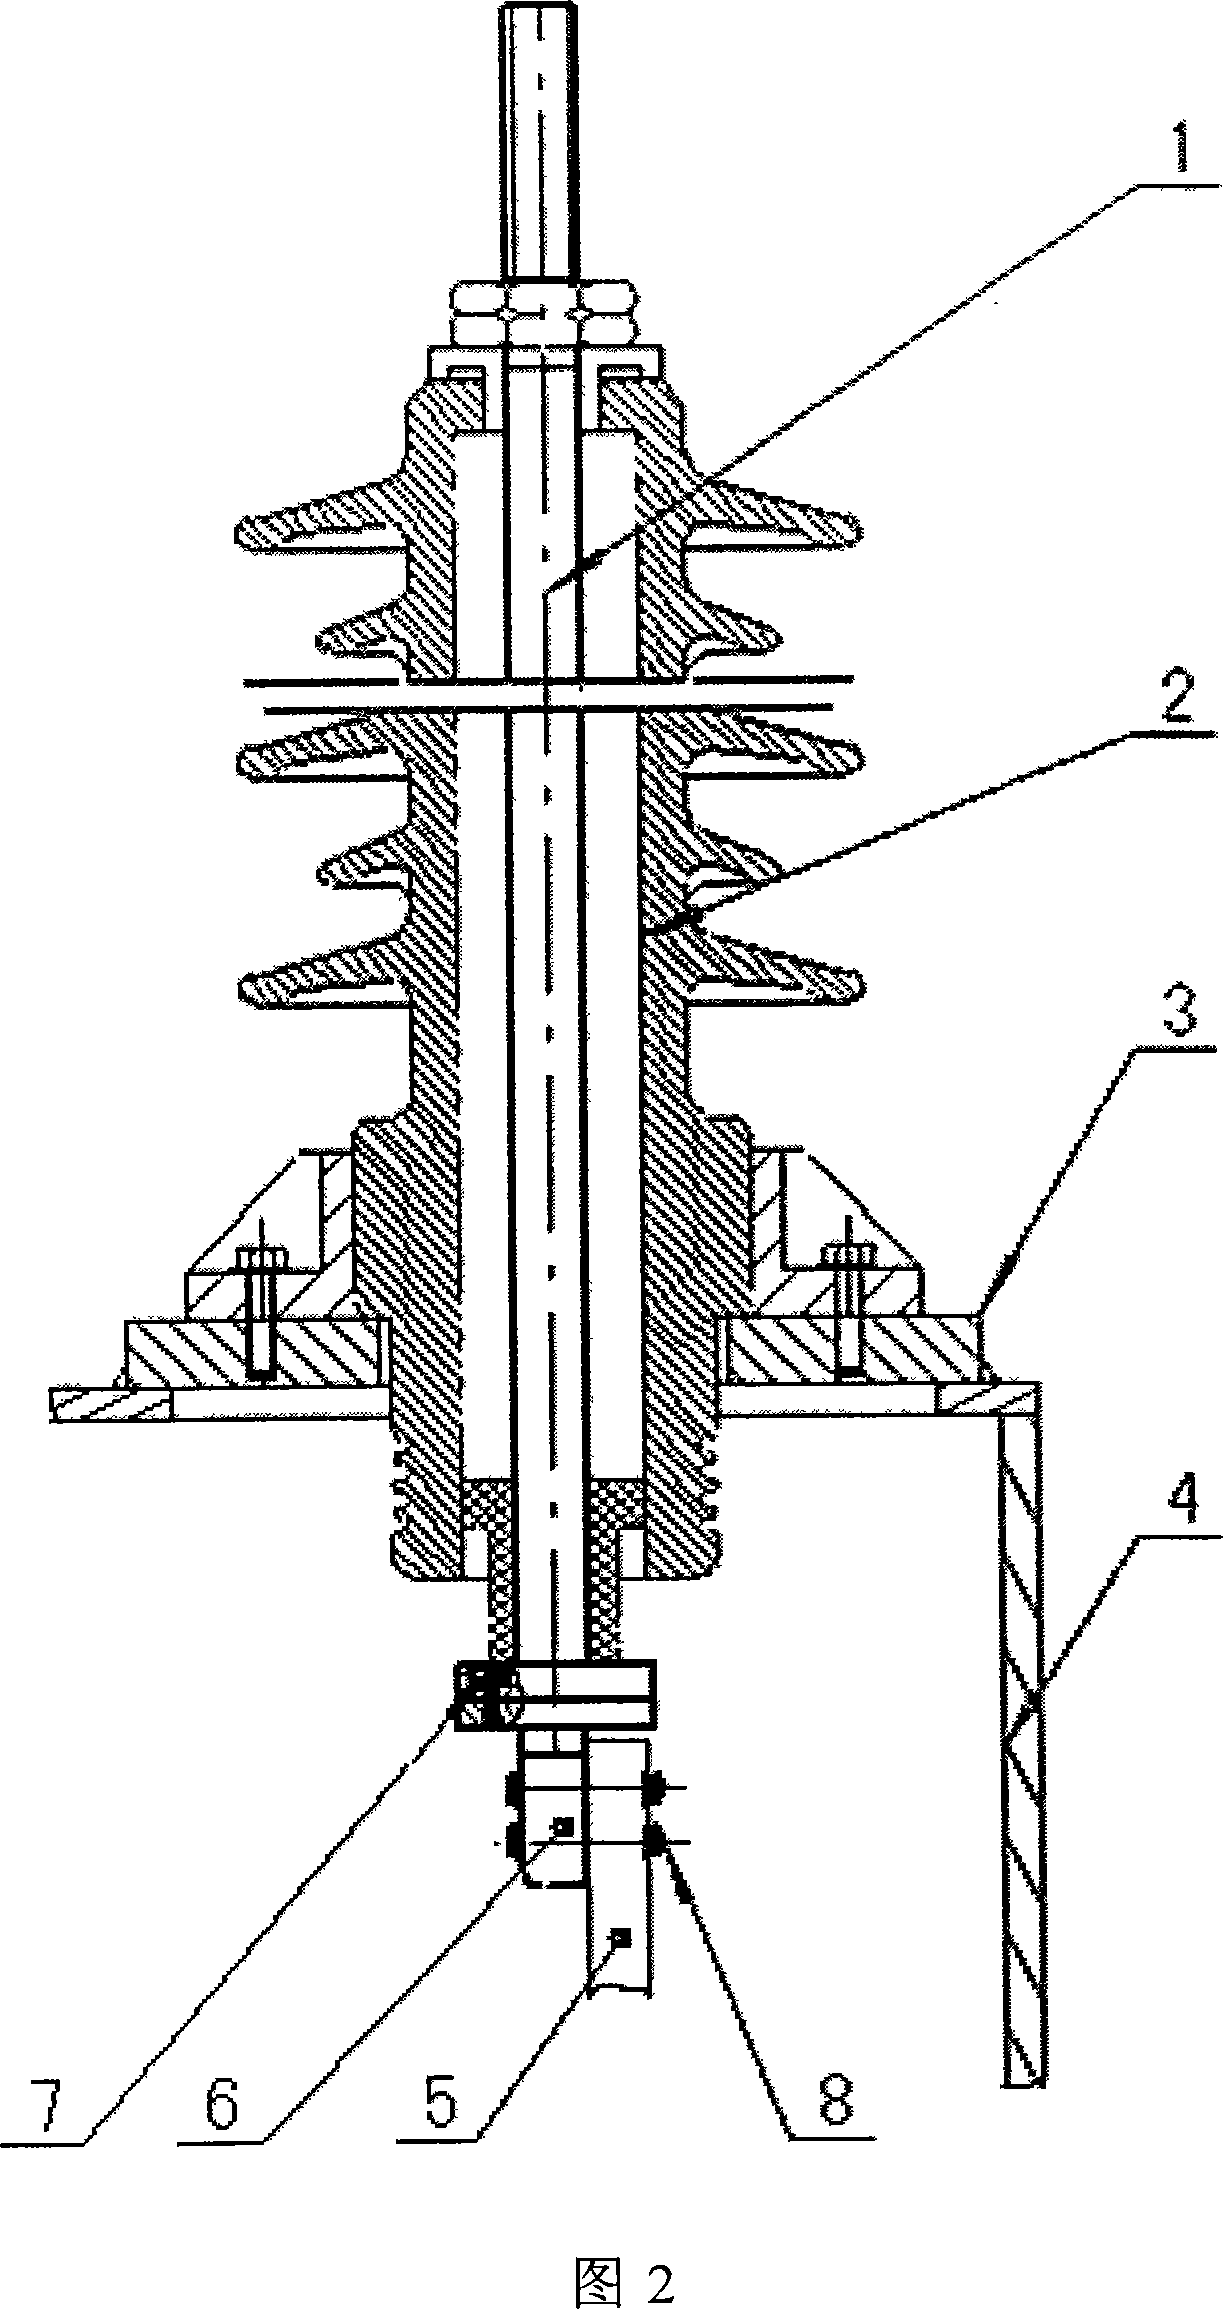 Transformer conducting bar and winding leads connection structure